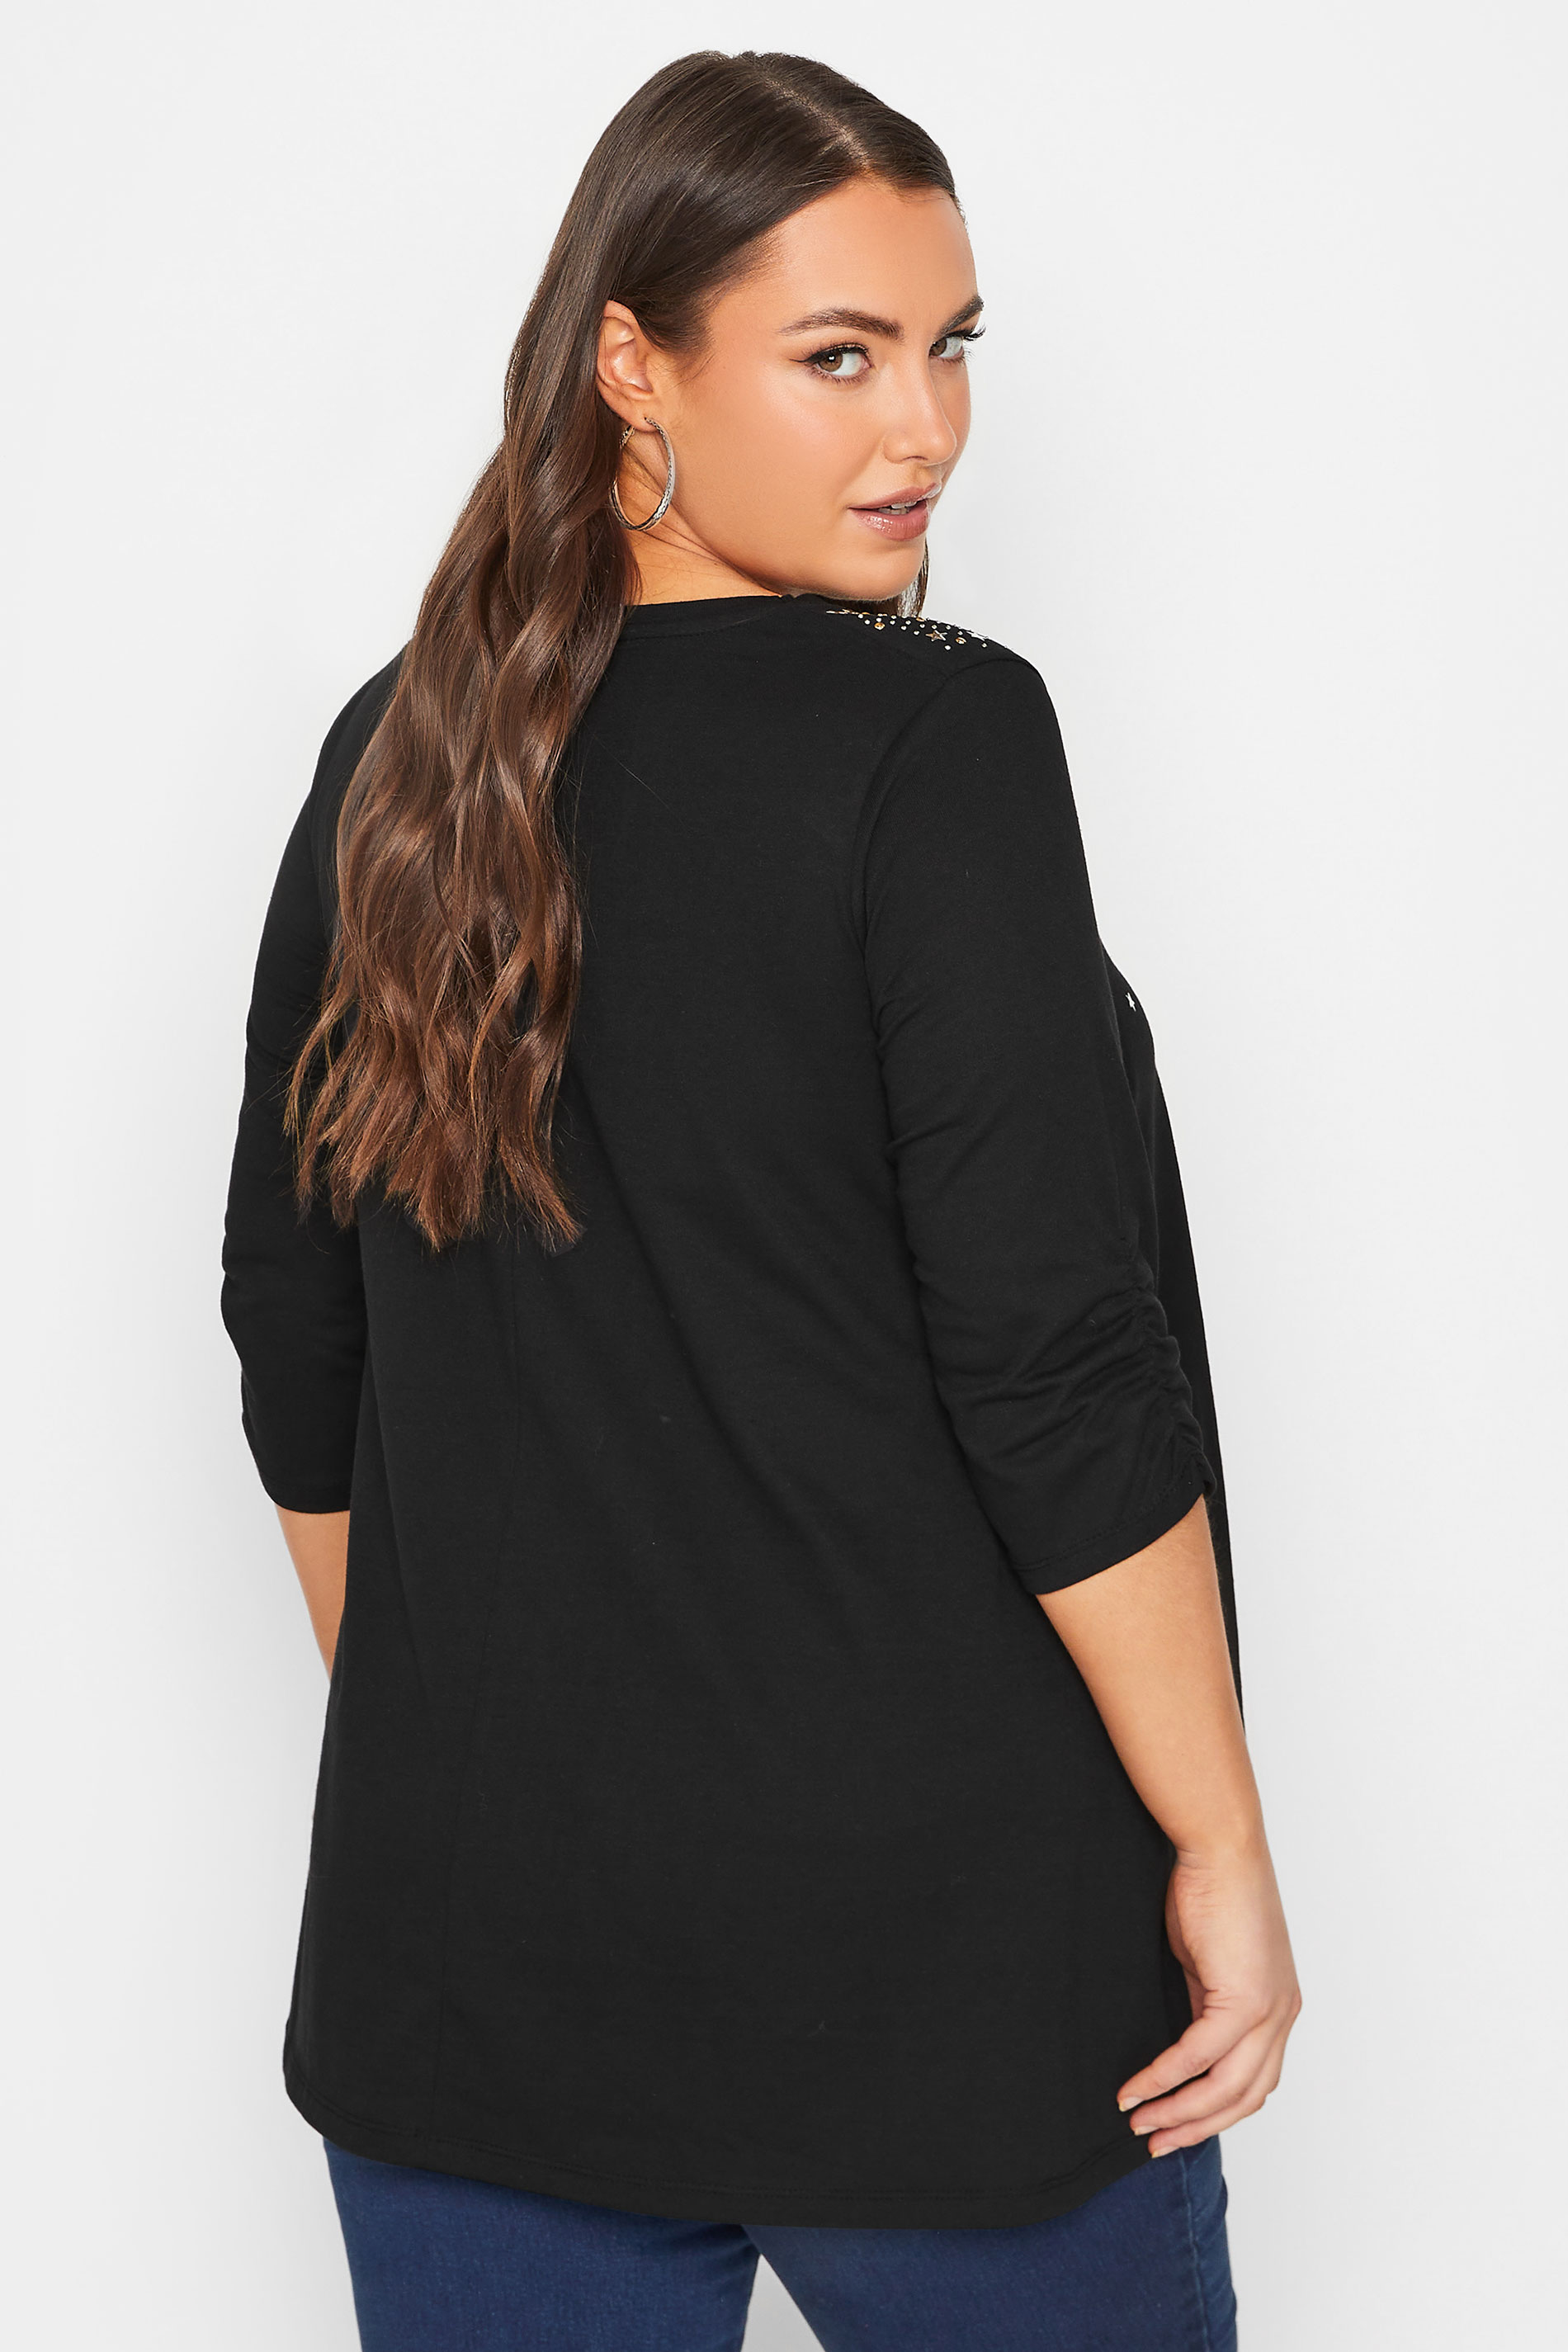 YOURS Curve Black Star Embellished Top | Yours Clothing 3